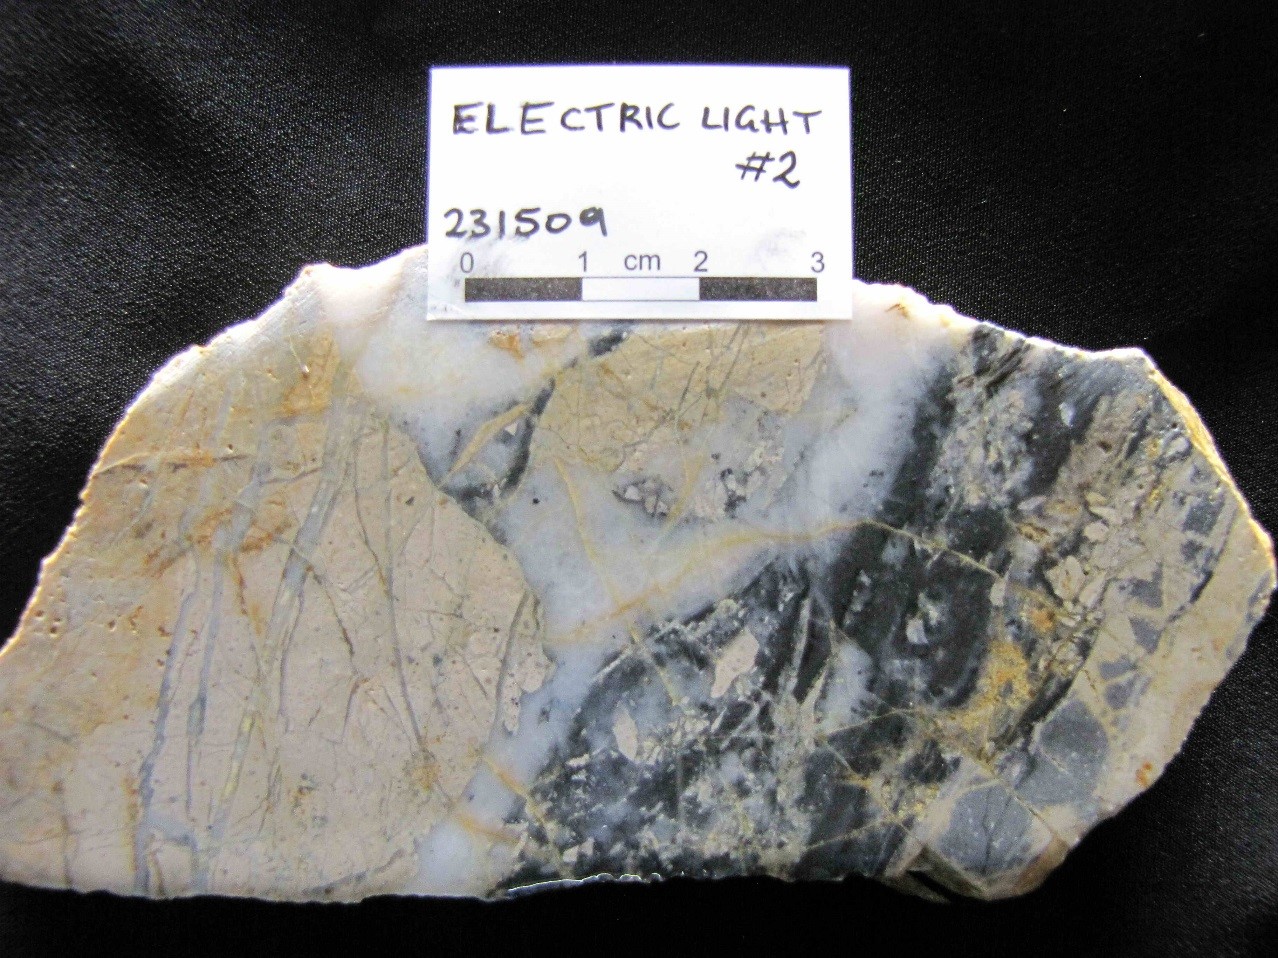 PLATE 13: Early phase of brecciation cemented by fine, black silica-pyrite cut by a stockwork of clear to white, fine comb quartz. Rhyolite breccia ore from Electric Light. Intrusion Related Epizonal (Sample #231509; 70.9 g/t Au, 50.6 g/t Ag).